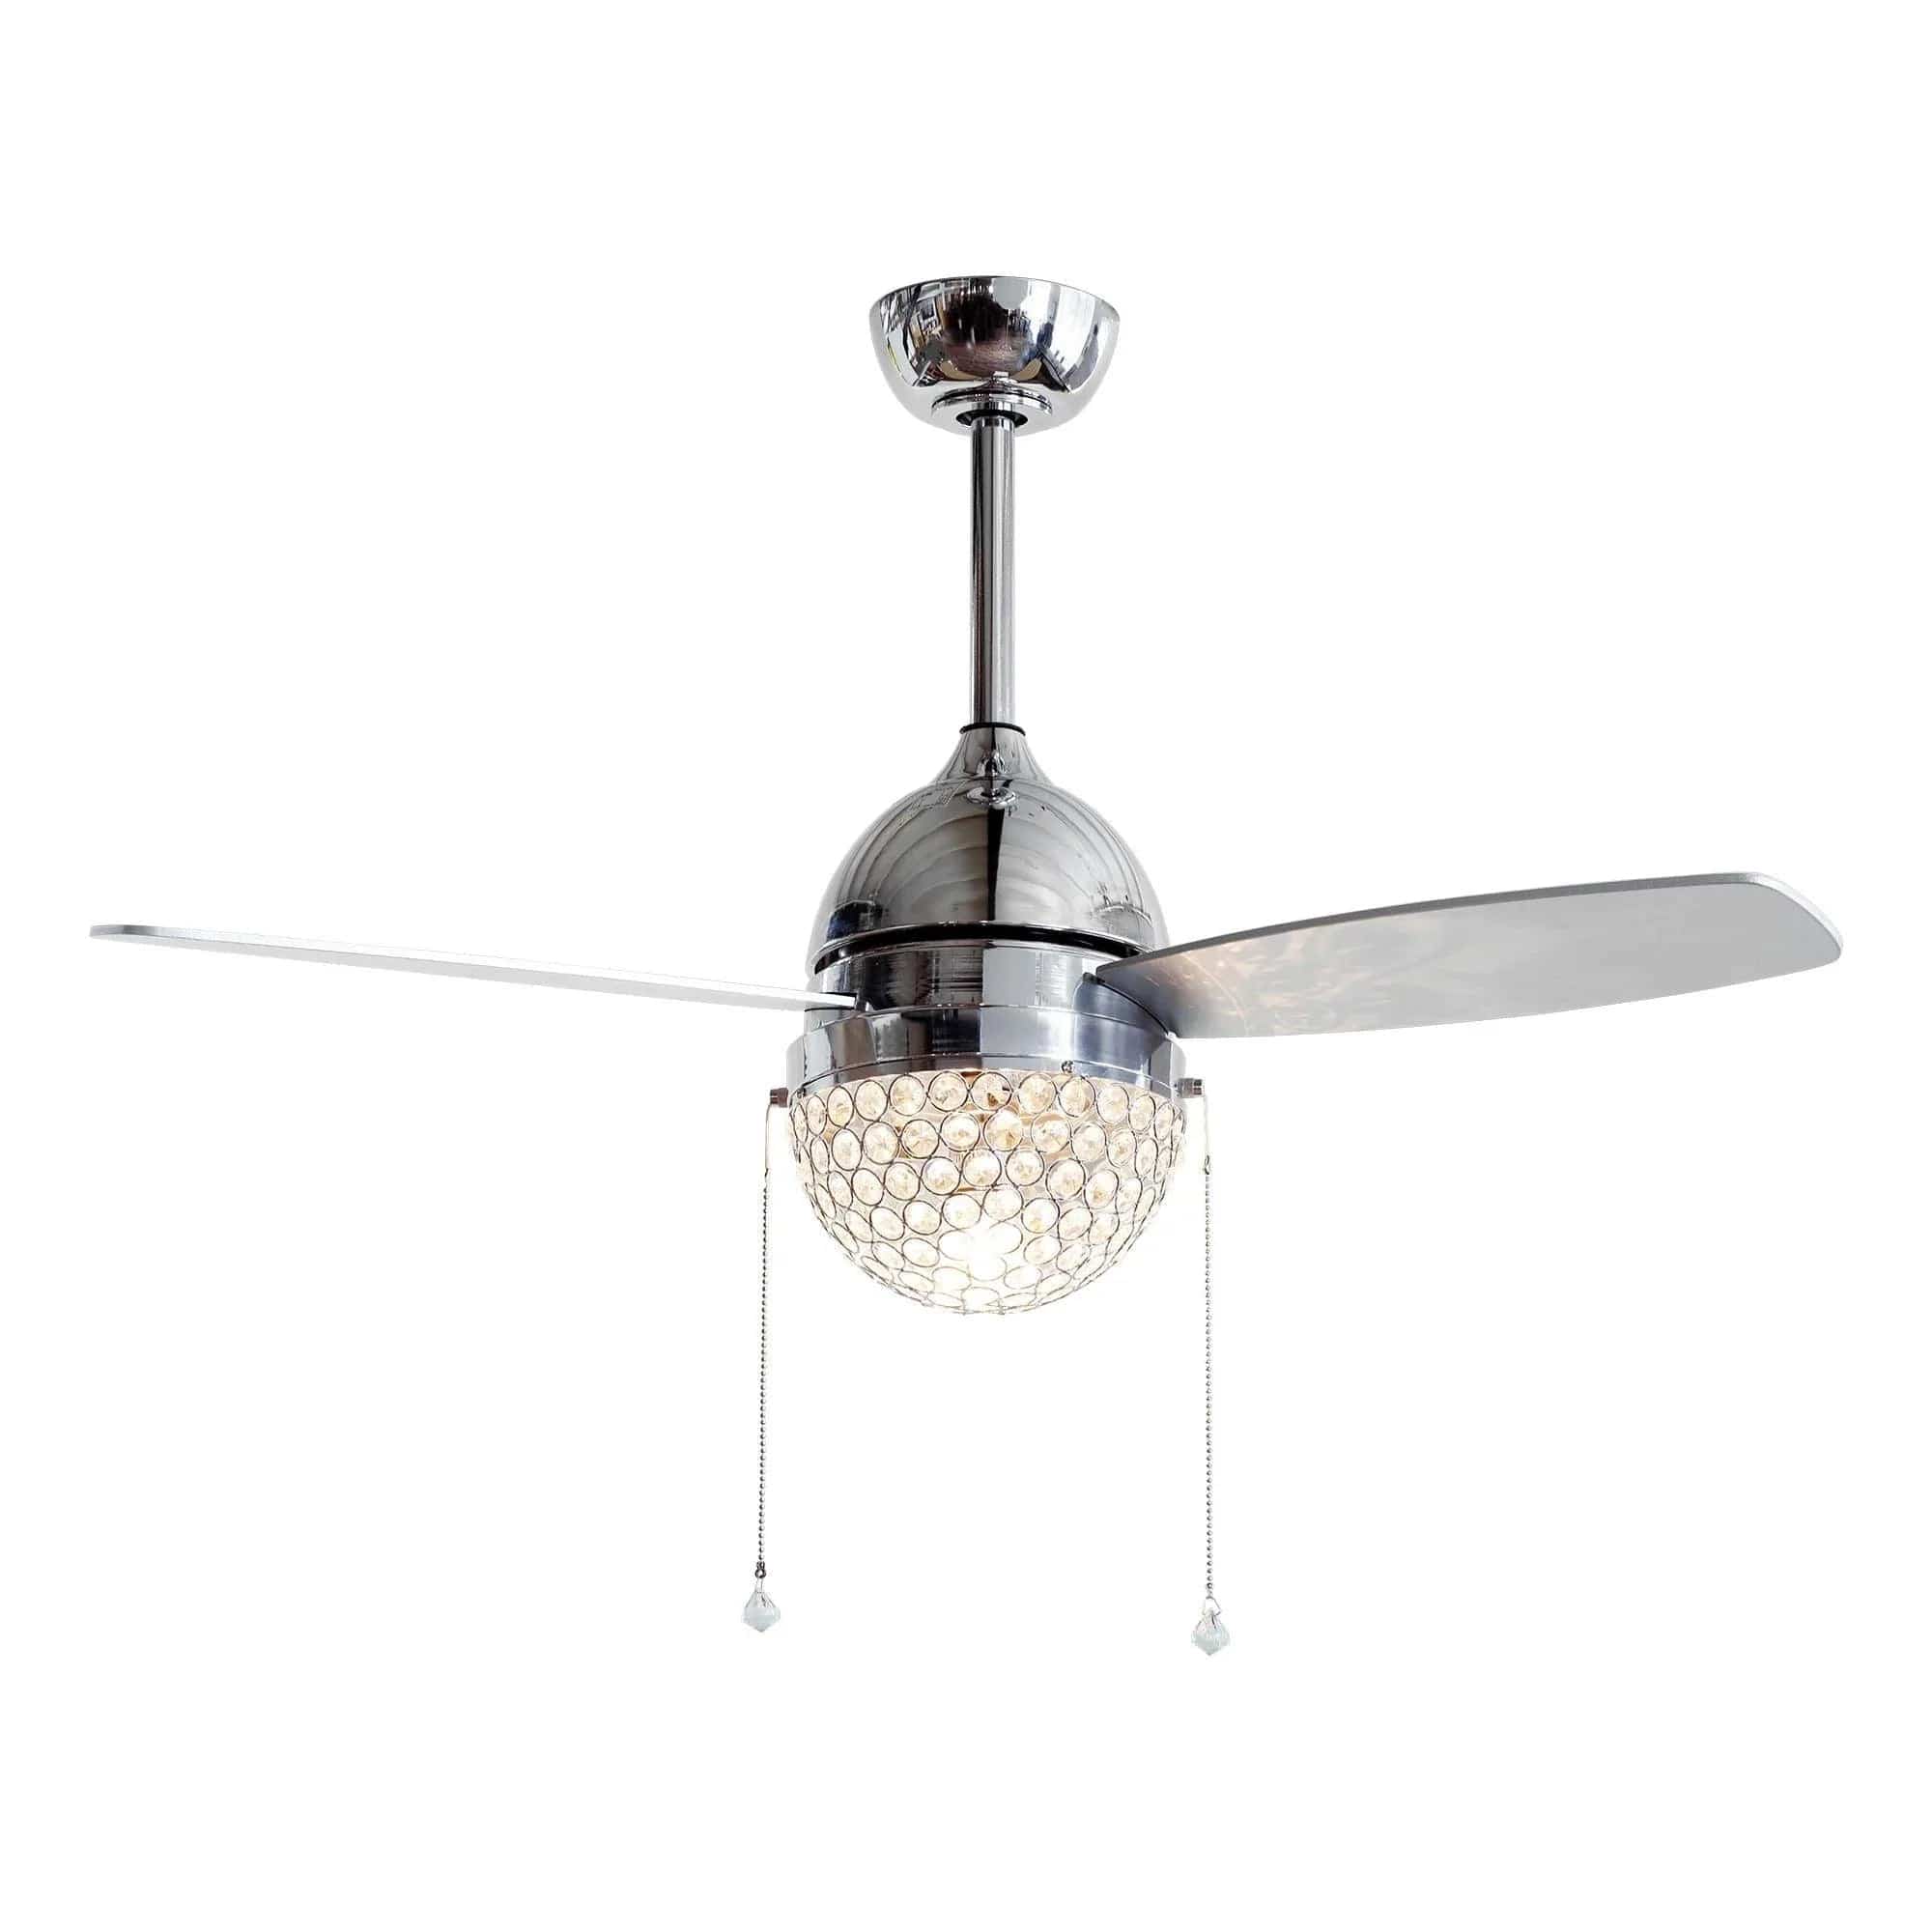 Parrot Uncle Parrot Uncle 42 In. Dreyer Modern Ceiling Fan with Lighting and Remote Control Ceiling Fan F6273110V